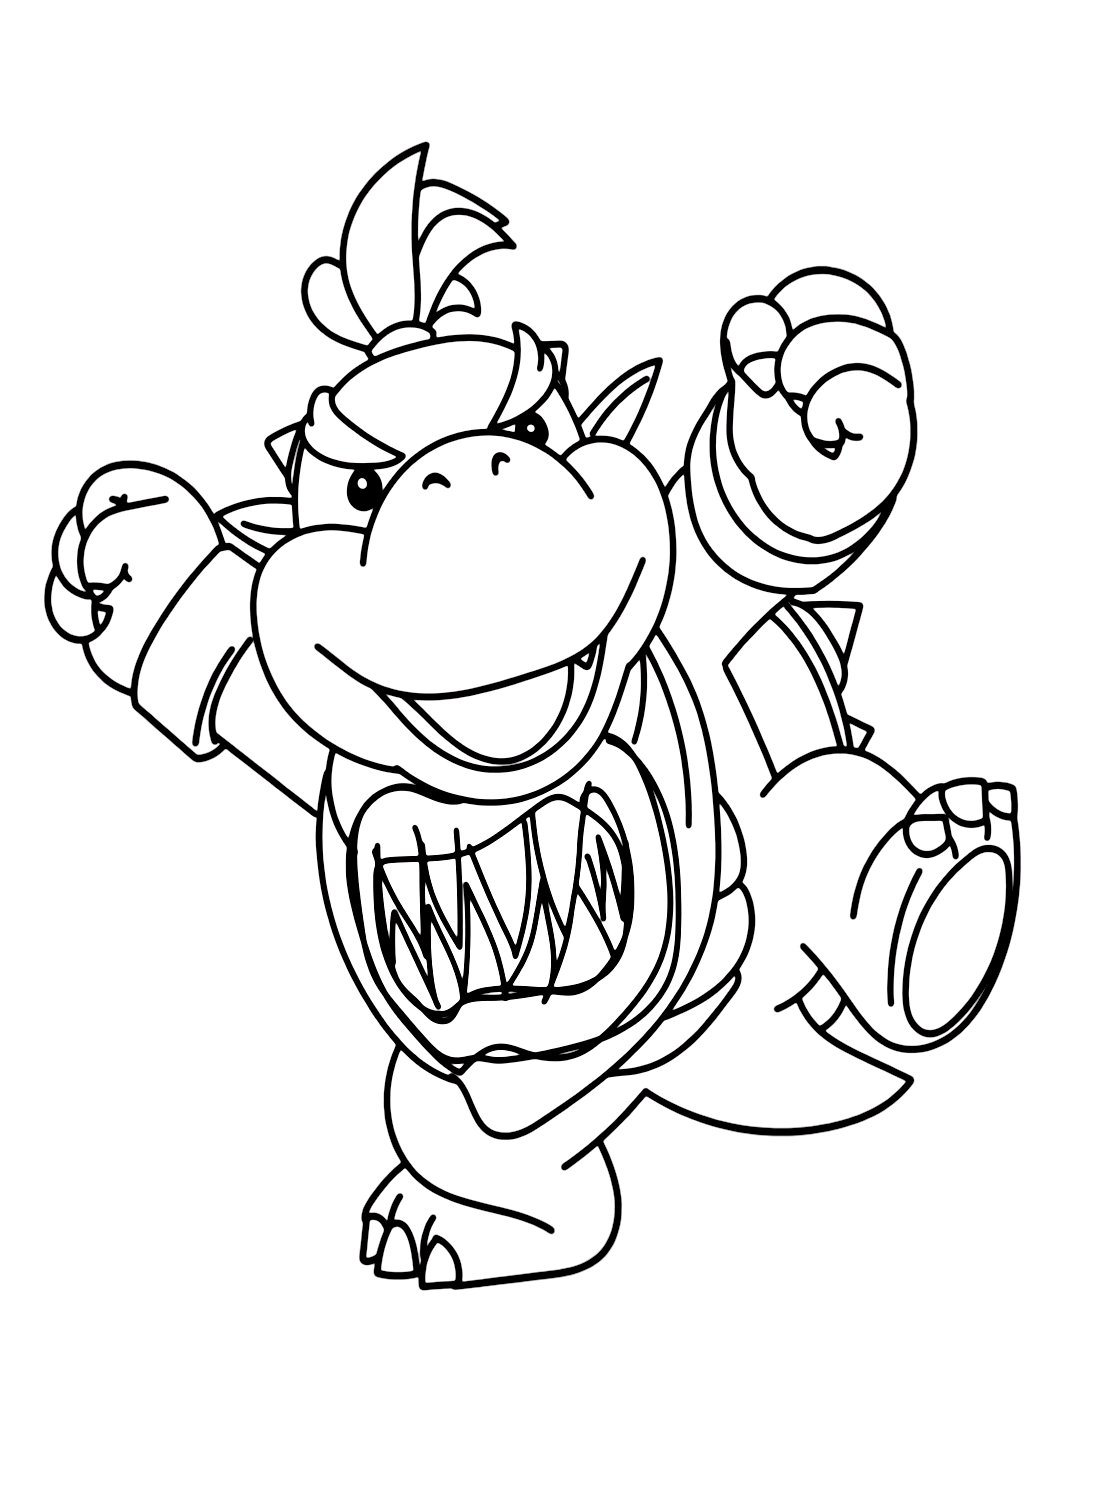 Bowser Jr. from Super Mario Coloring Page - Free Printable Coloring Pages